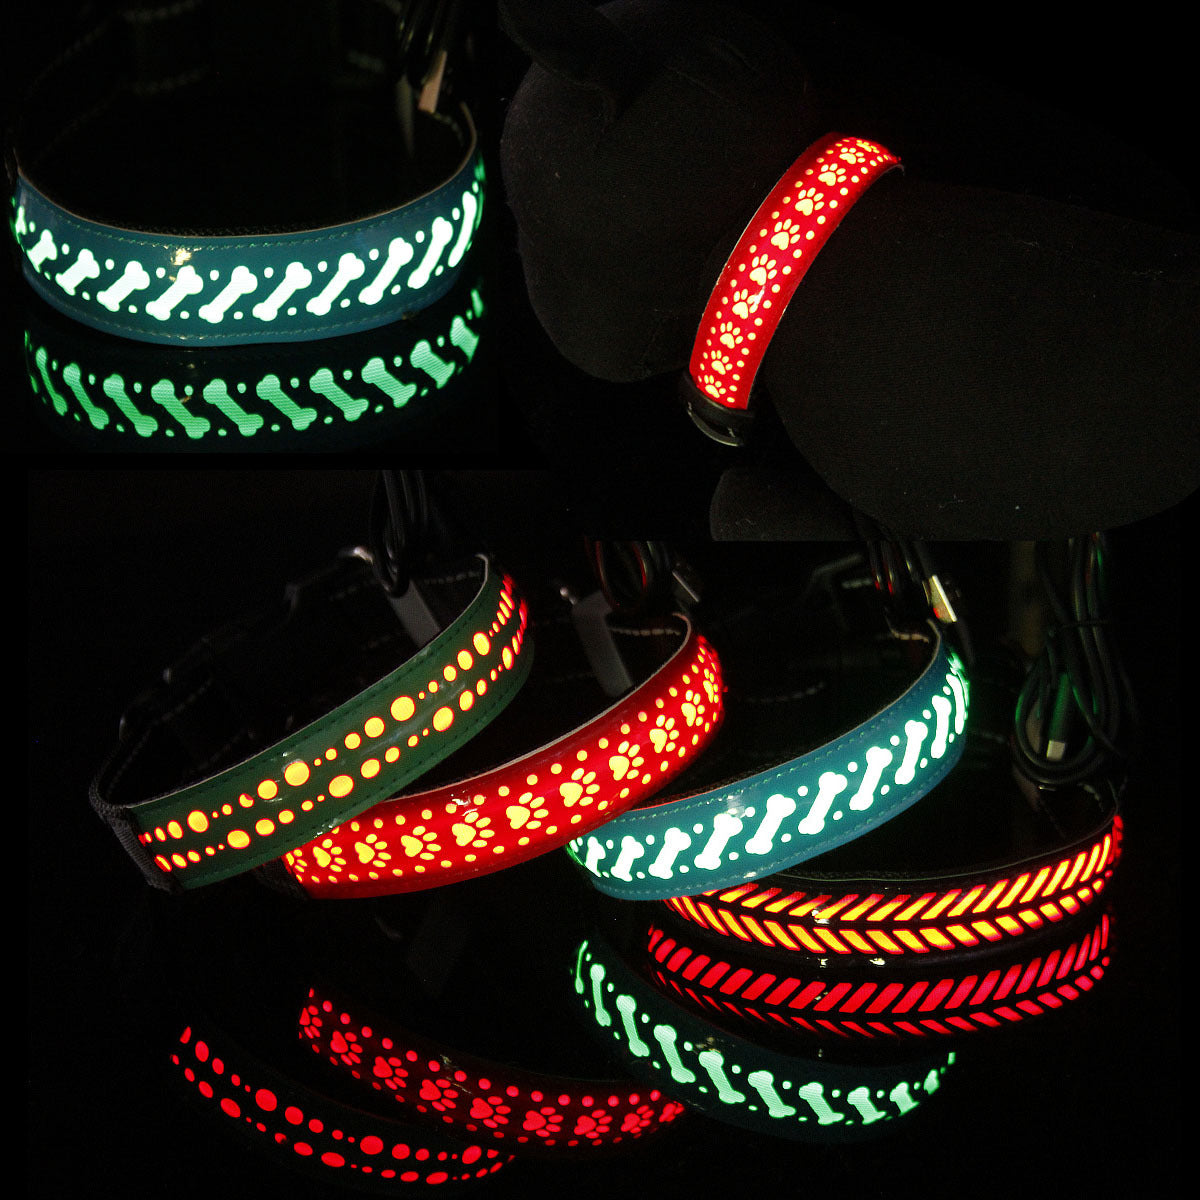 LED Light-Emitting Rechargeable Carved Leather Pet Light-Up Collar